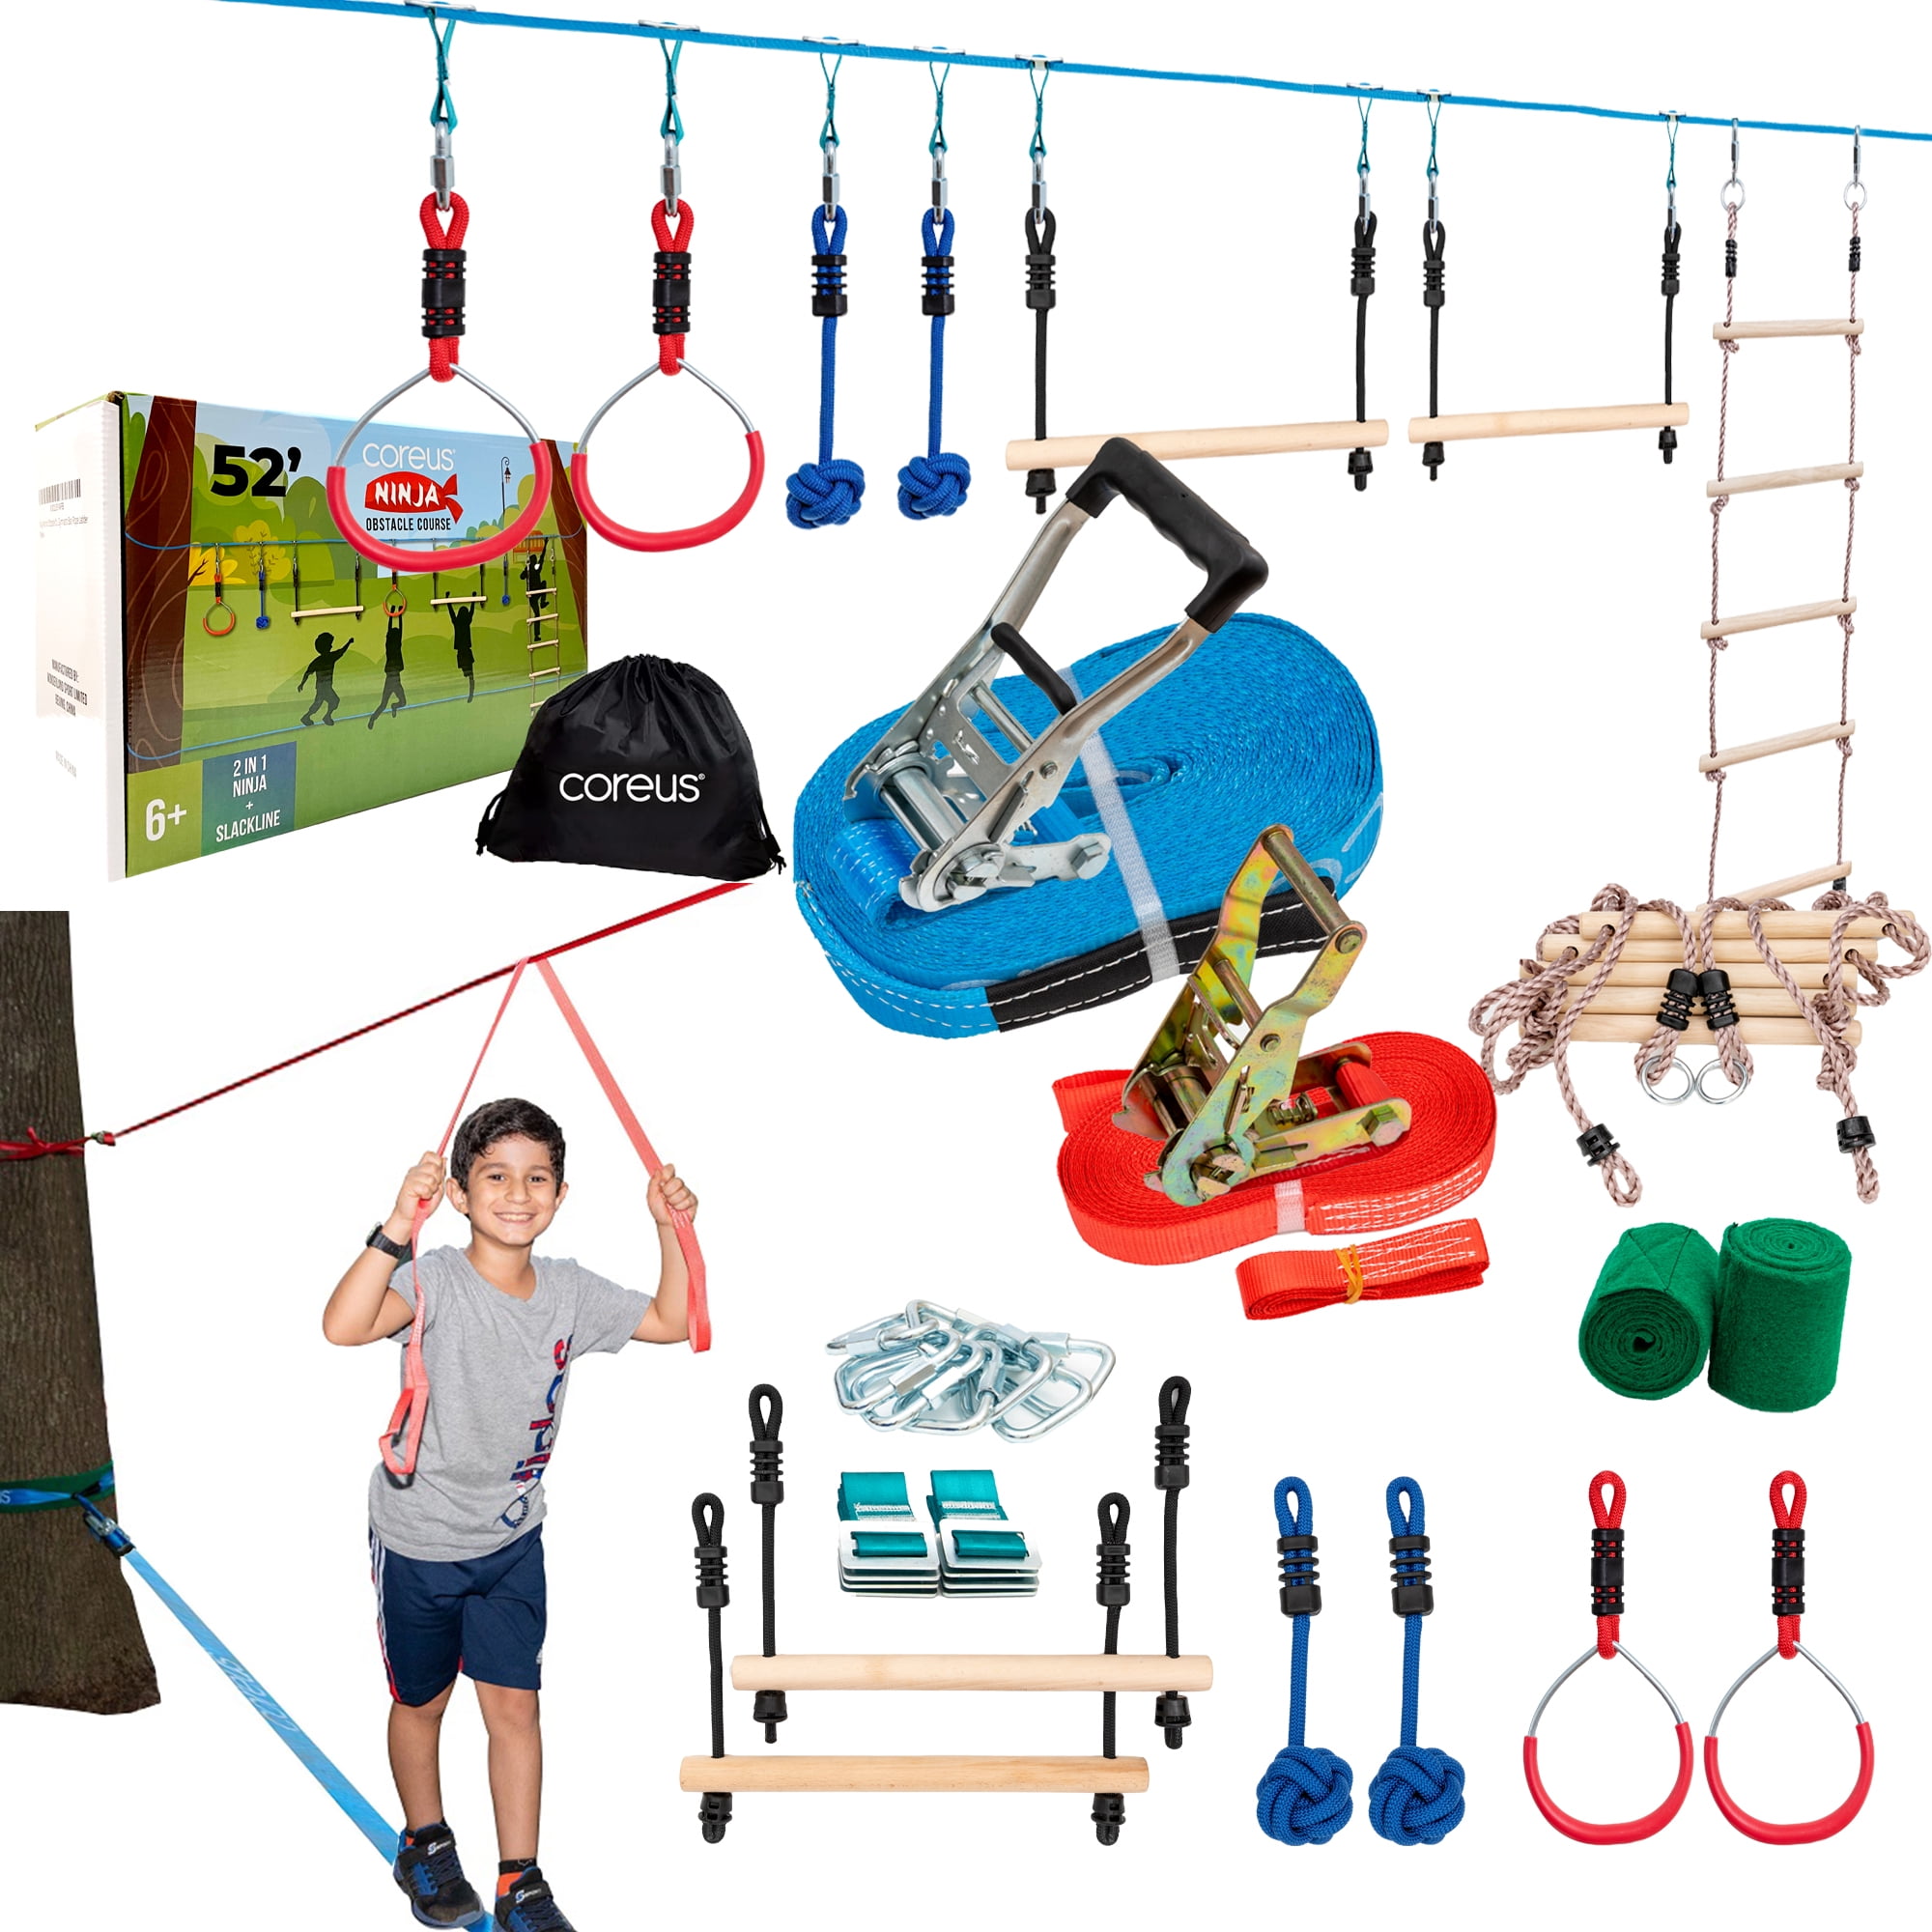 Slackline Kit 50' with 8 Accessories ... Ninja Warrior Obstacle Course for Kids 